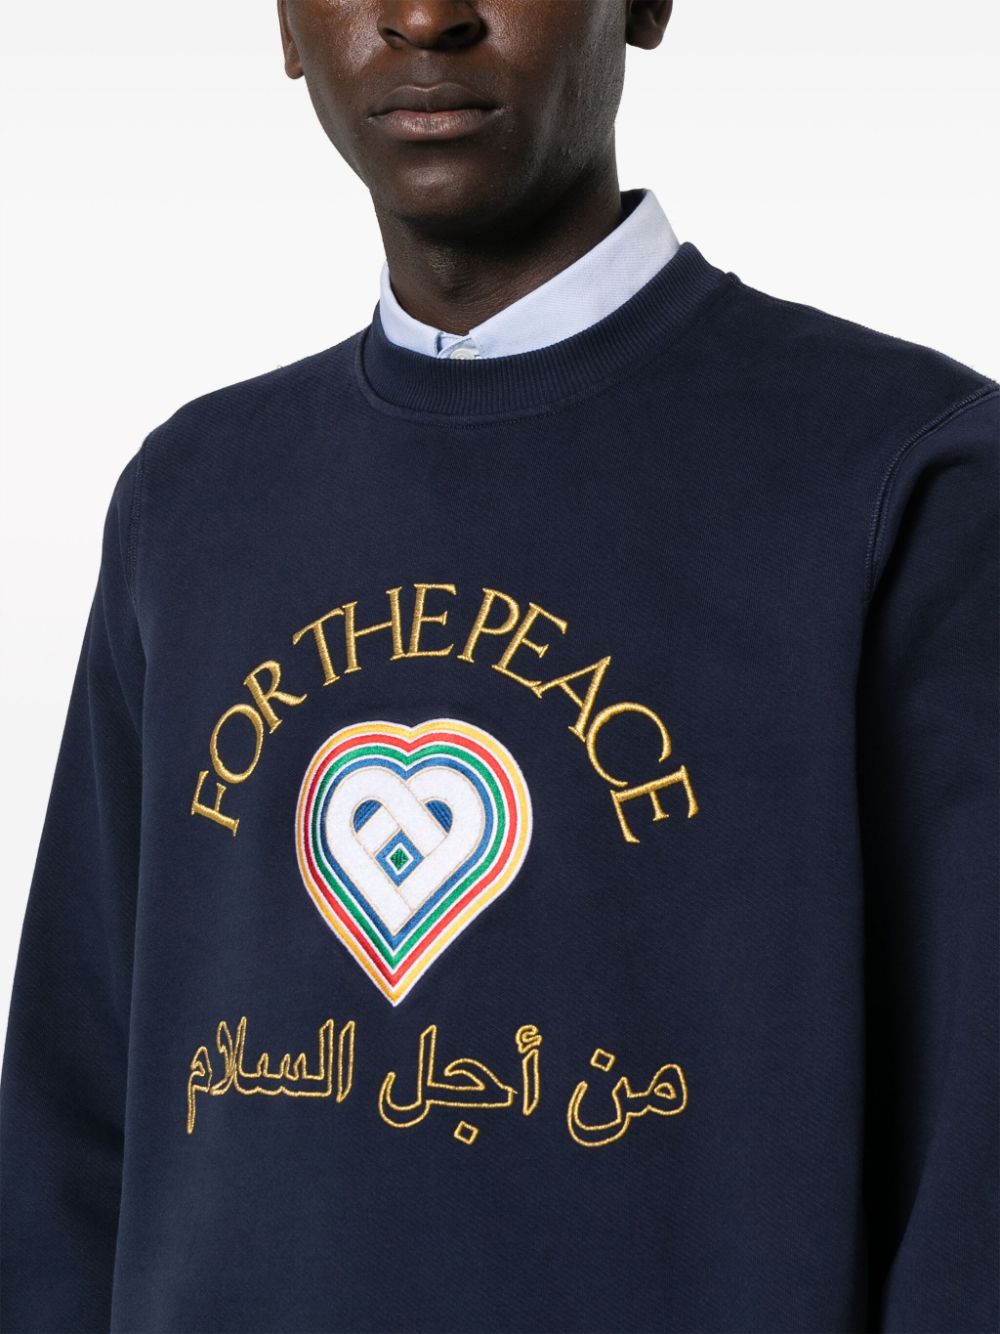 For The Peace cotton sweatshirt